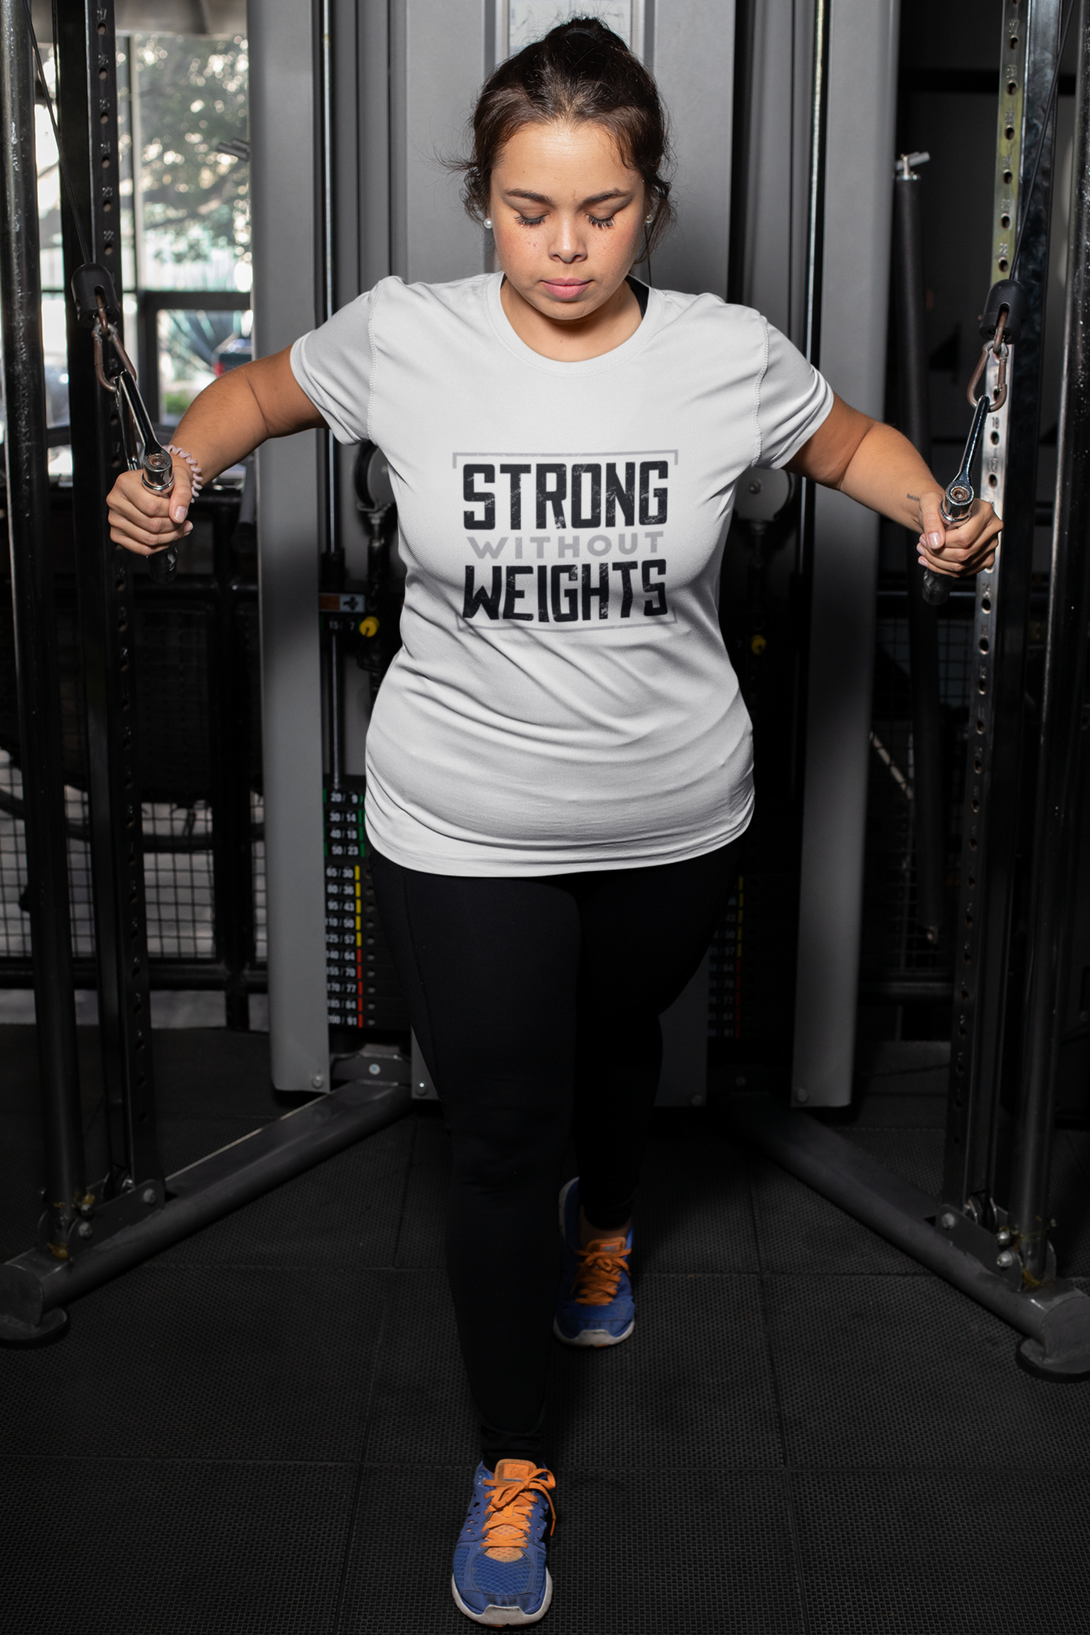 Strong Without Weights Printed T-Shirt For Women - WowWaves - 6